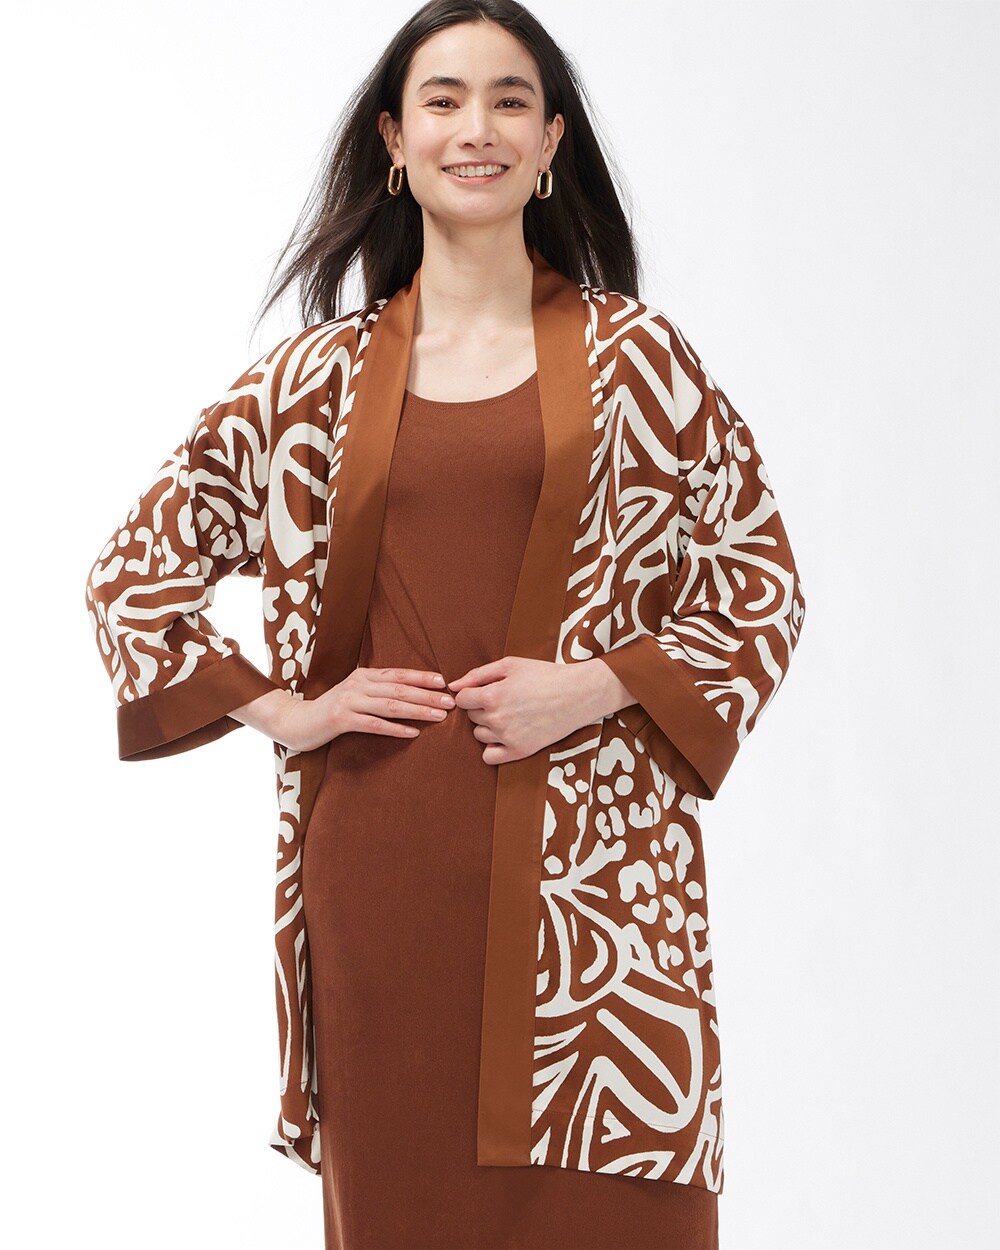 Travelers Collection Animal Print Kimono video preview image, click to start video